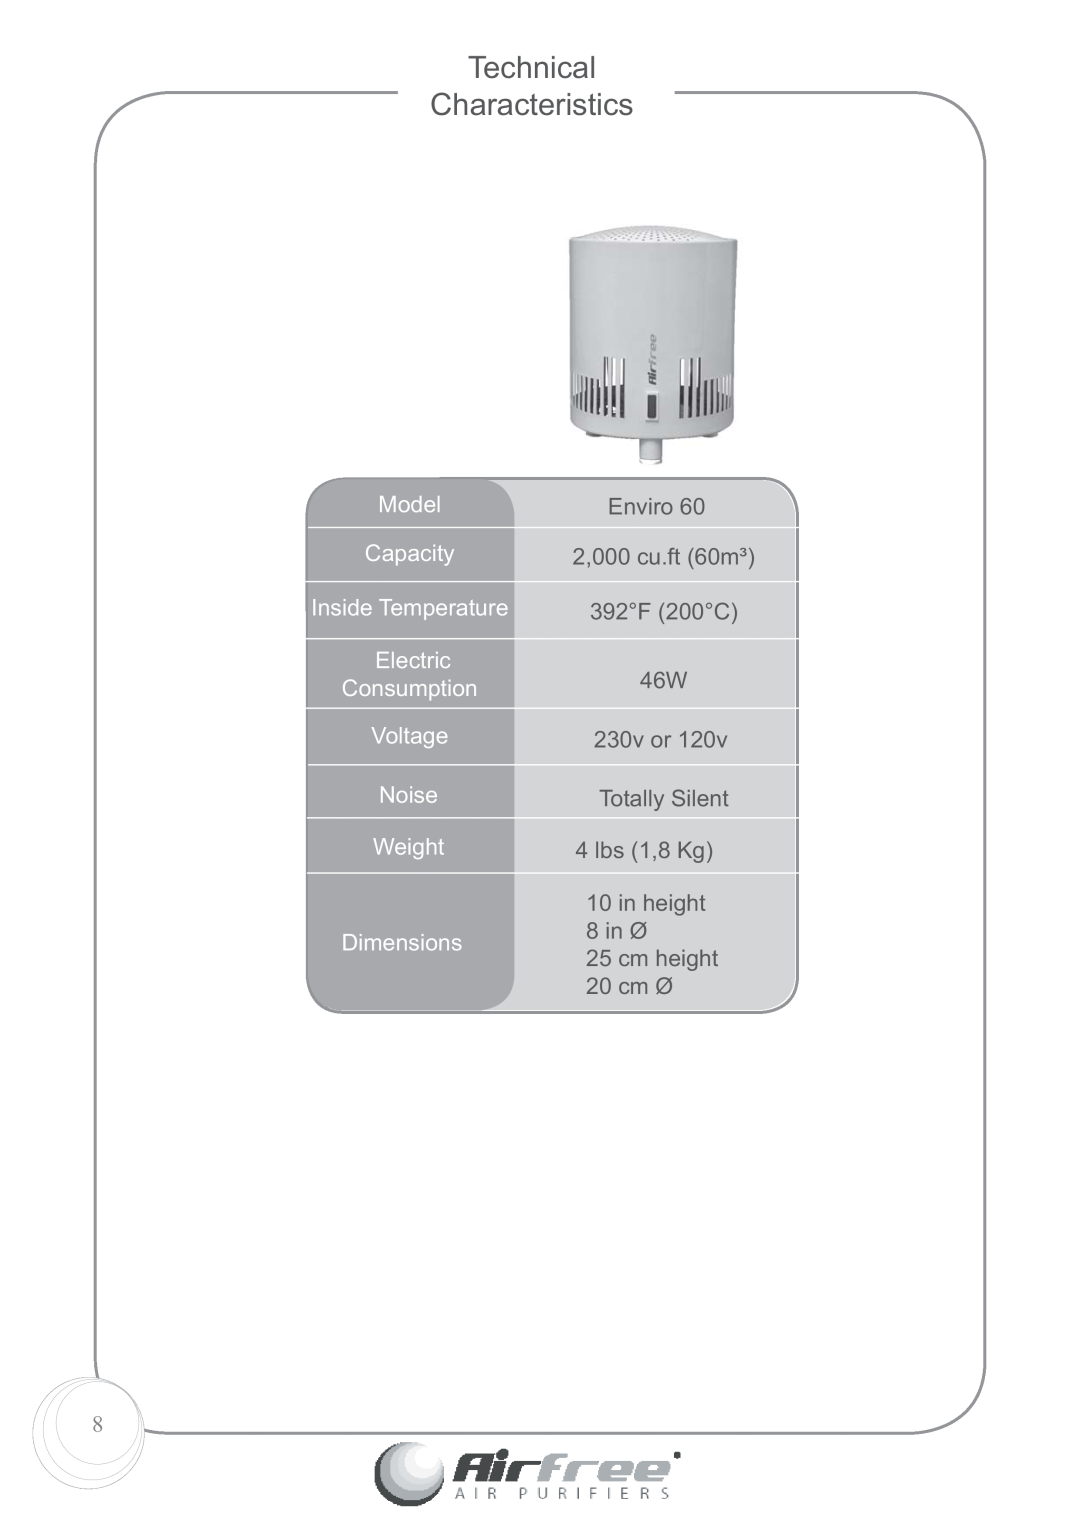 Airfree 60 Technical Characteristics, Model, Capacity, Inside Temperature, Electric, Consumption, Voltage, Noise, Weight 